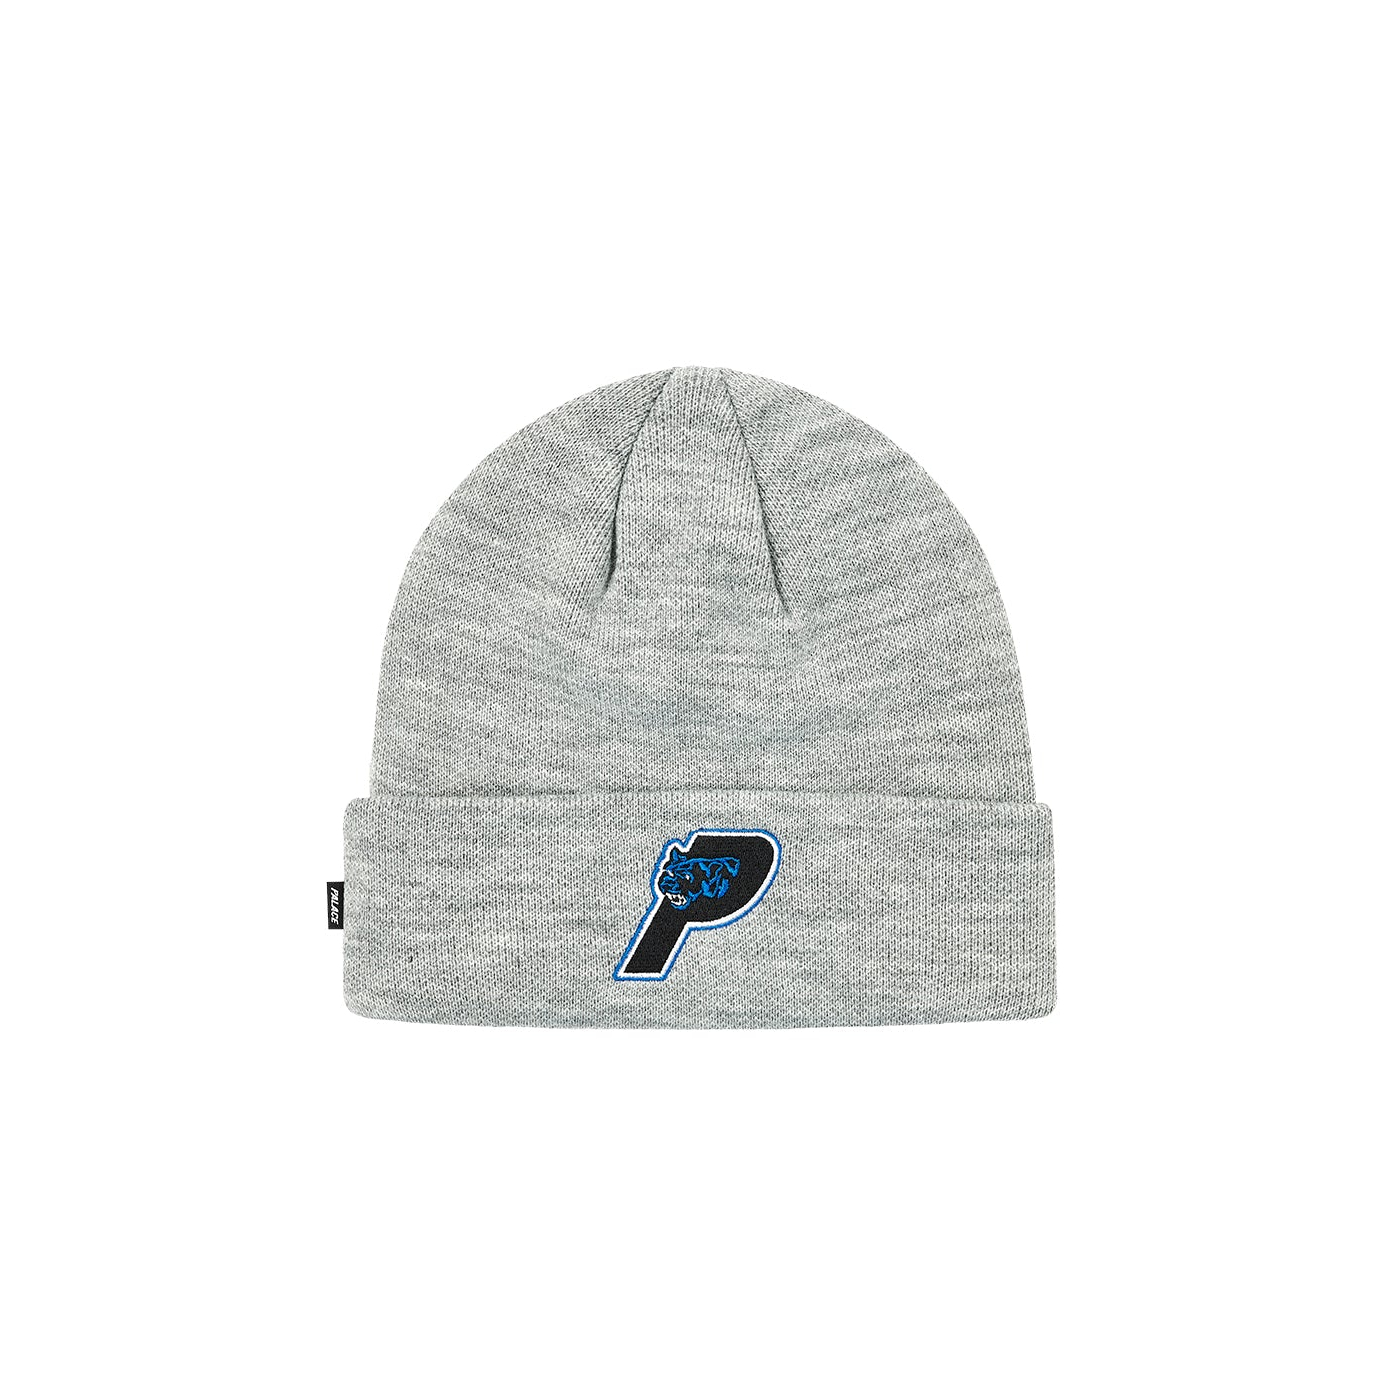 Thumbnail PANTHER BEANIE GREY MARL one color